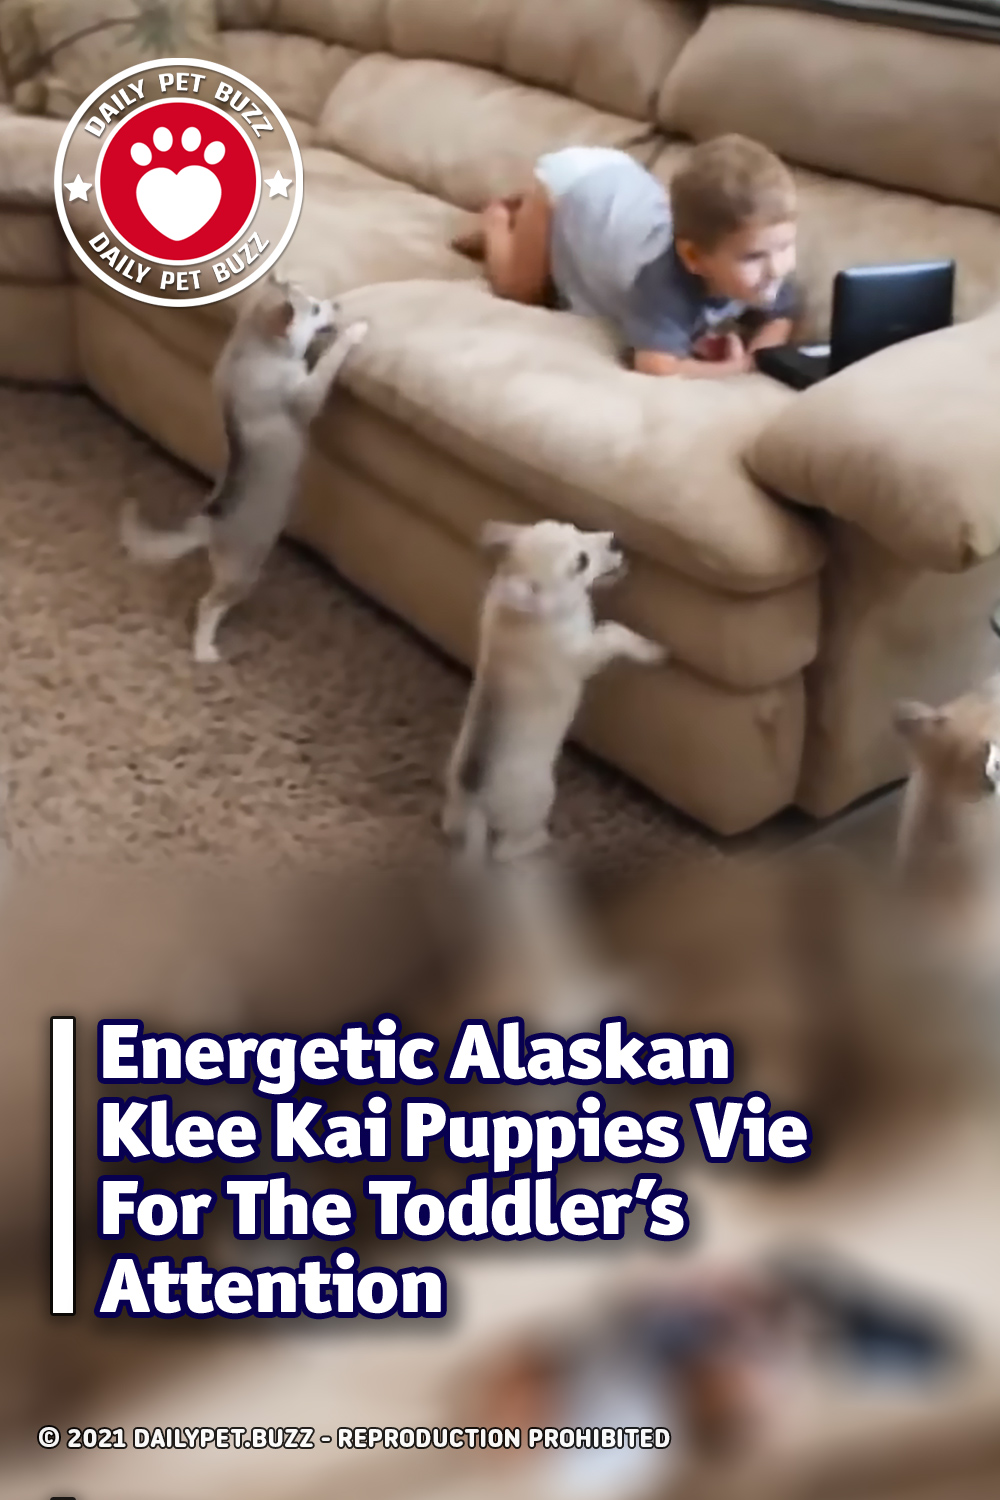 Energetic Alaskan Klee Kai Puppies Vie For The Toddler\'s Attention